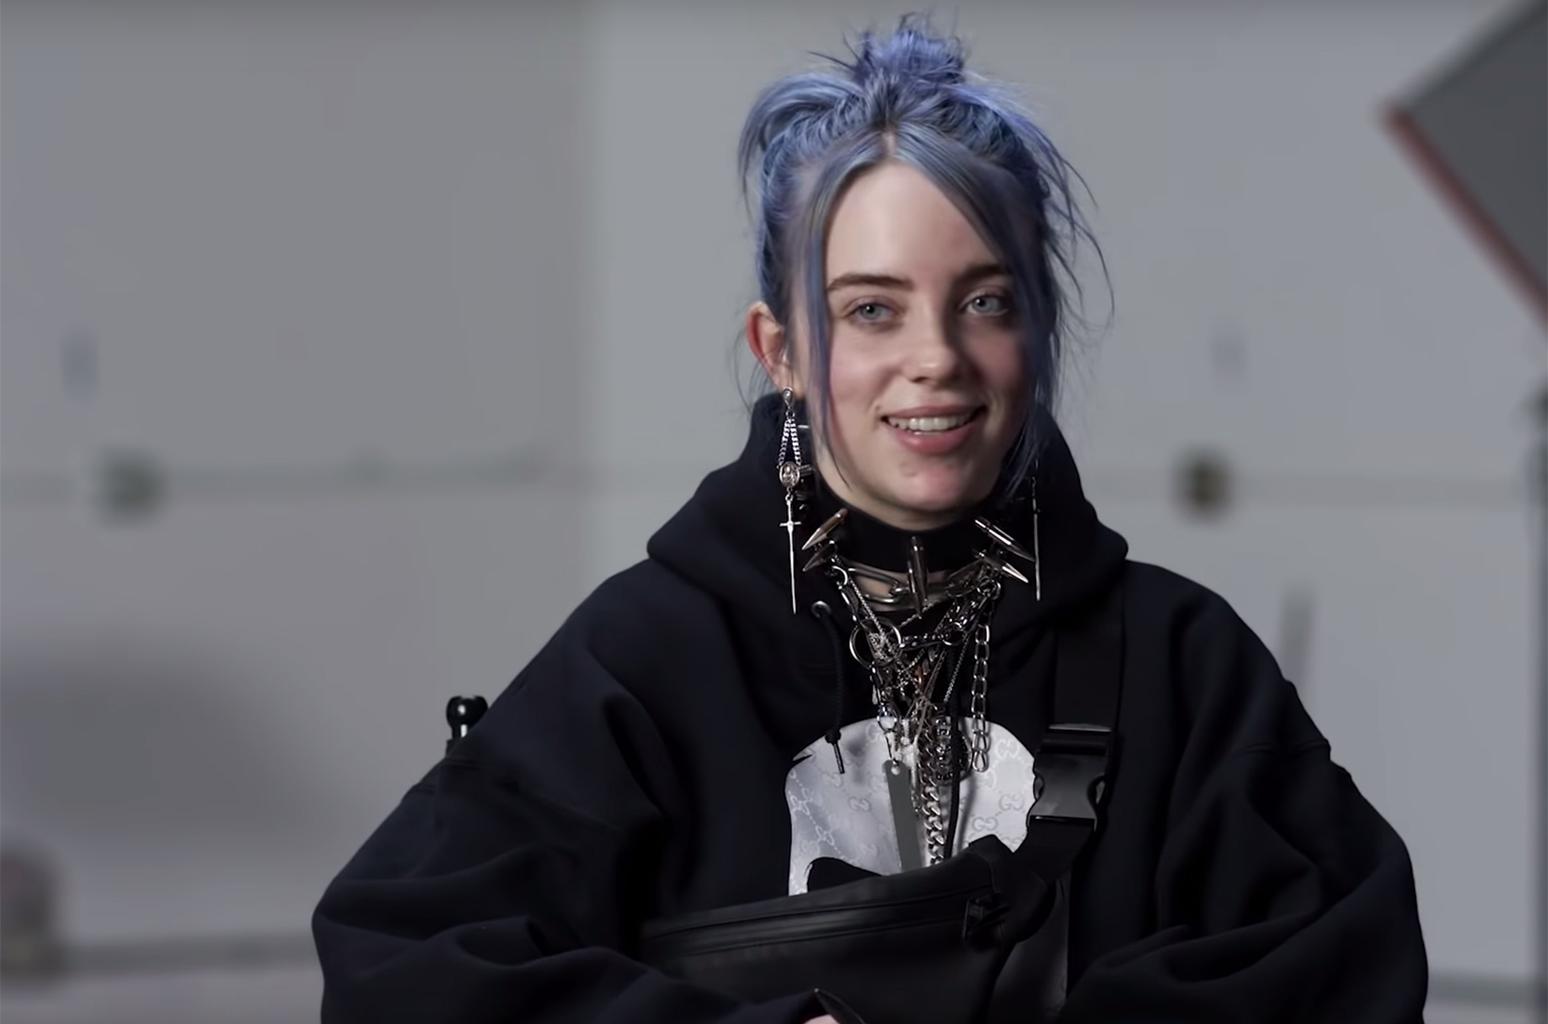 Billie Eilish Answers the Same Questions 1 Year Apart: Watch